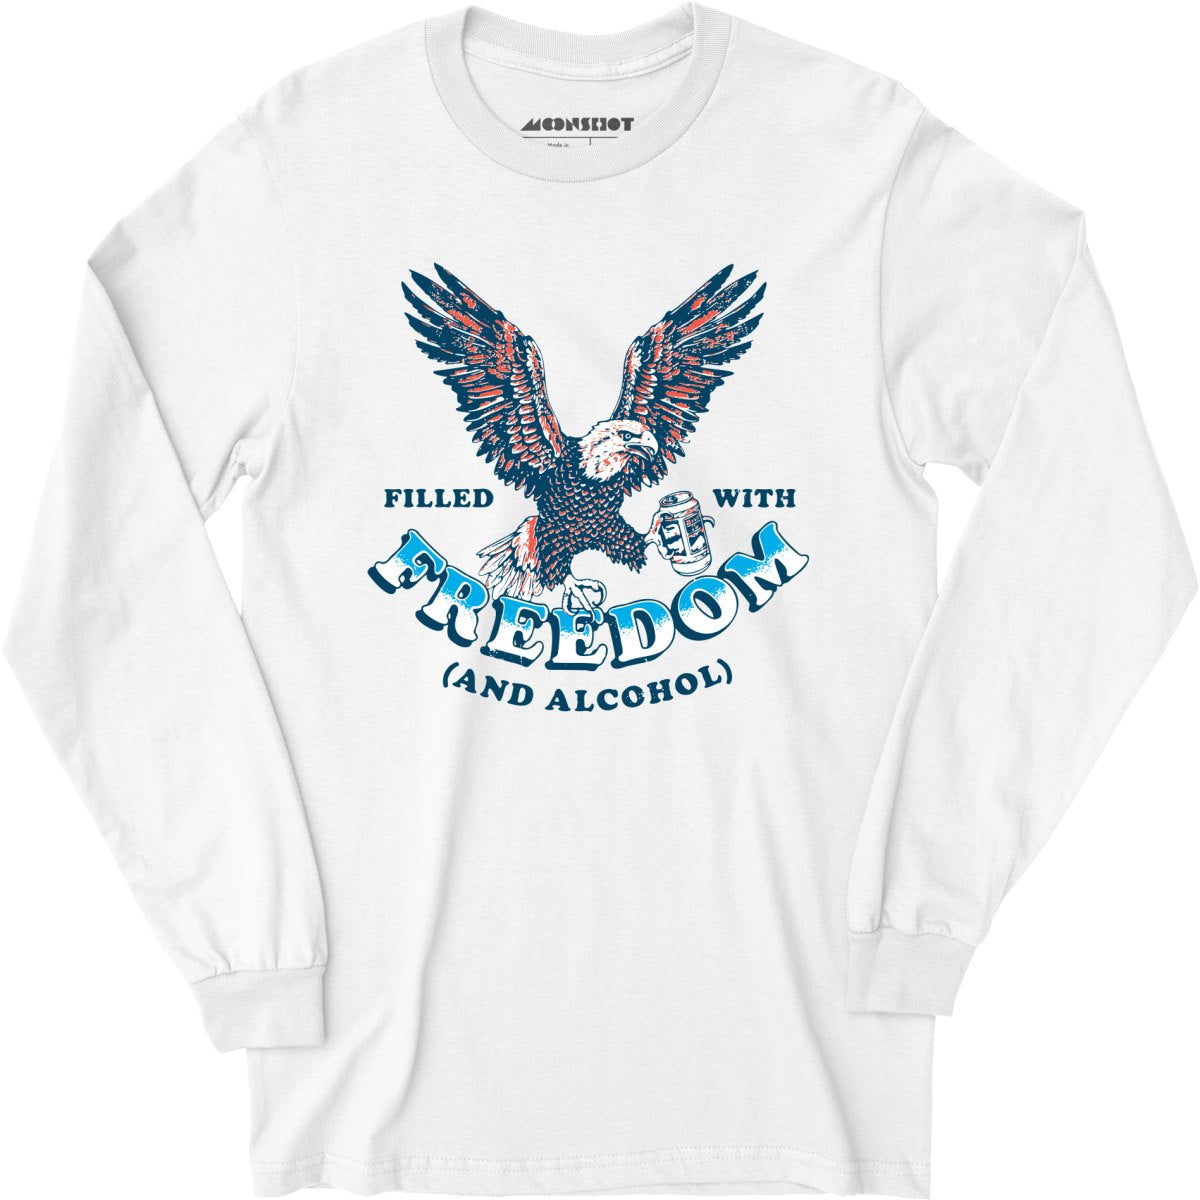 Filled With Freedom - Long Sleeve T-Shirt